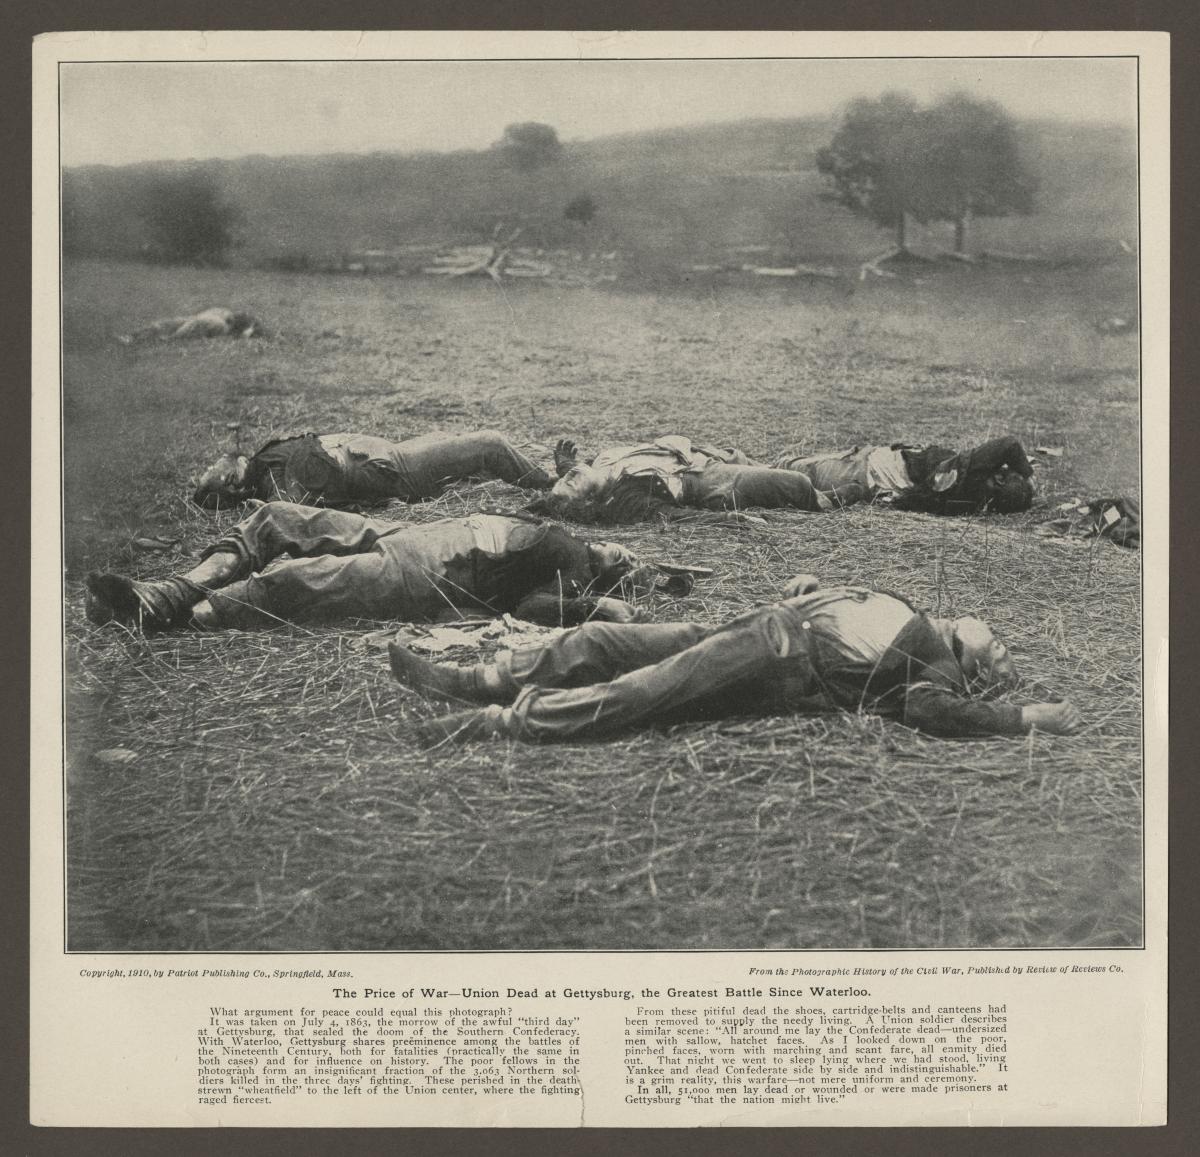 Gettysburg Article With Brady Photo. B&W photograph shows a field with several clothed bodies lying in it. The photograph has been reproduced in a newspaper.